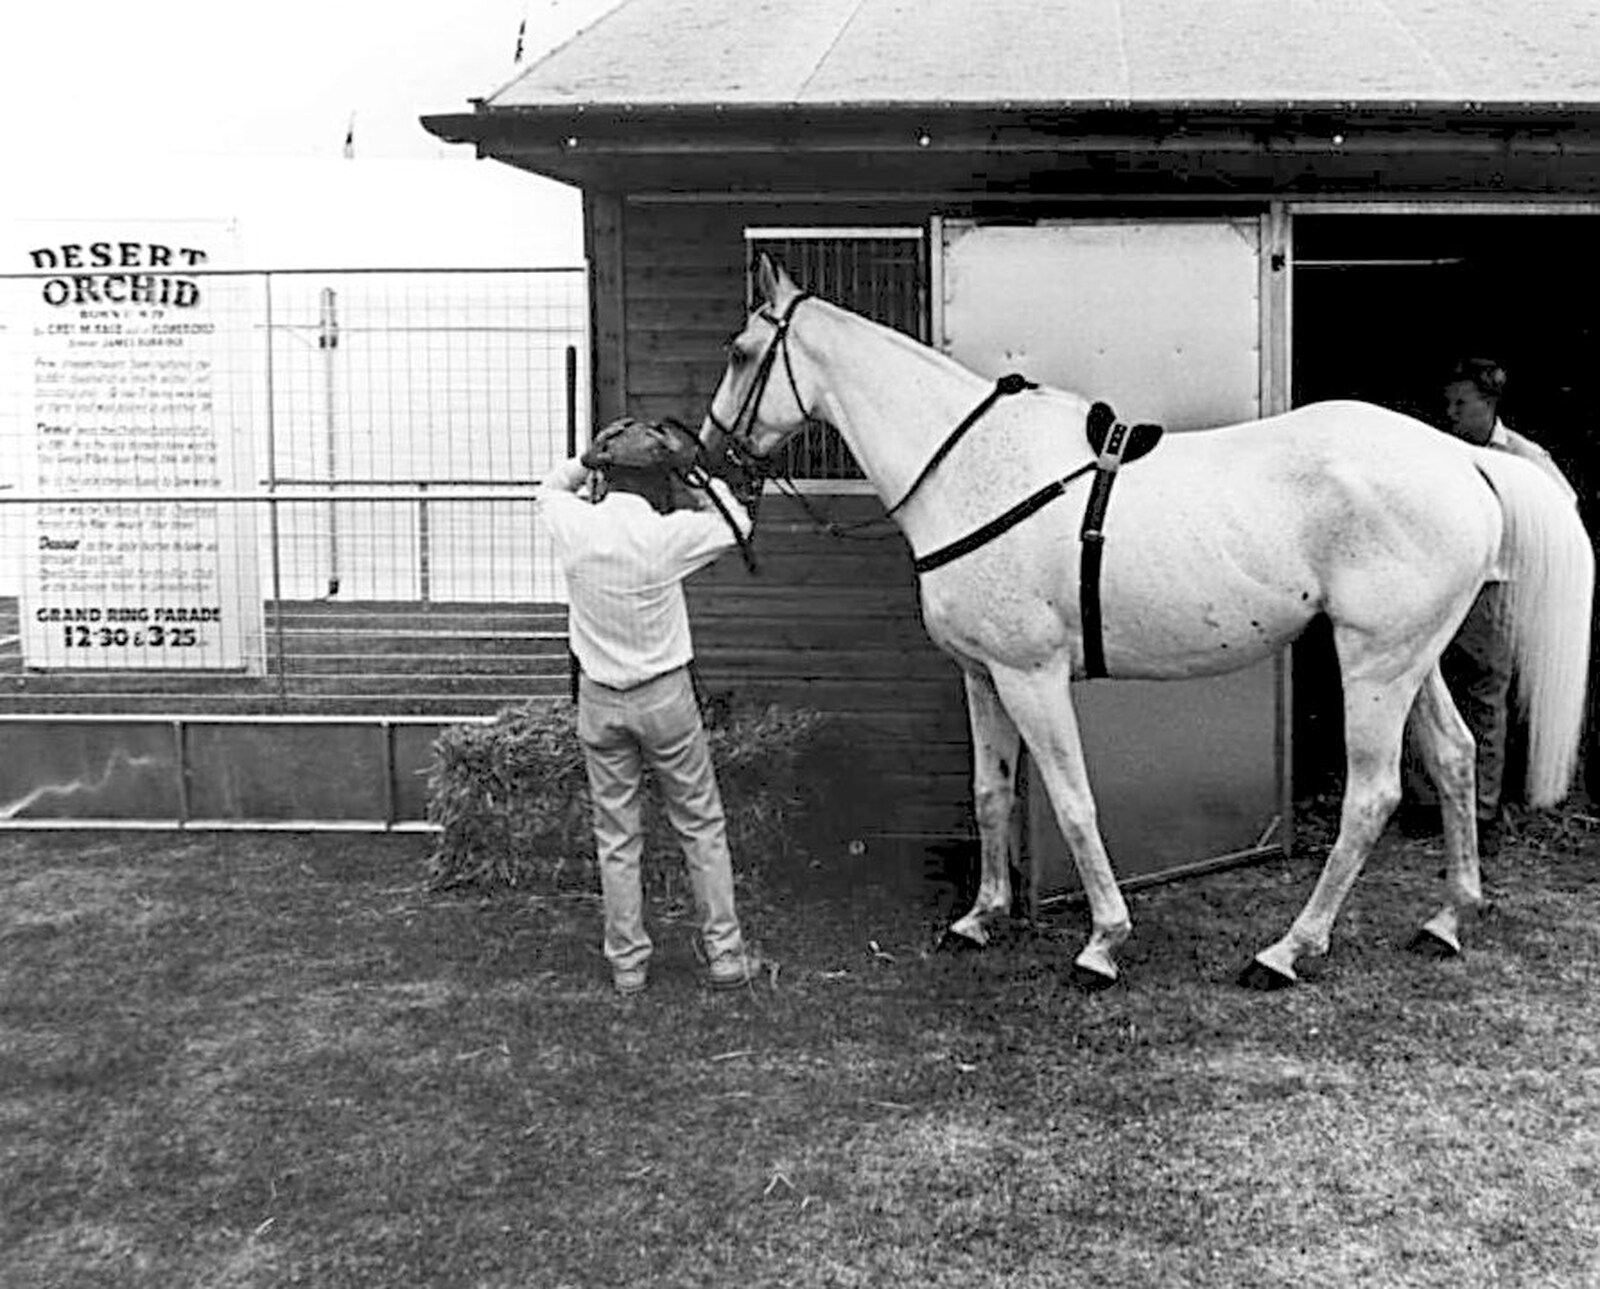 The Royal Norfolk Show, Costessey, Norwich - June 20th 1994: Famous racehorse Desert Orchid